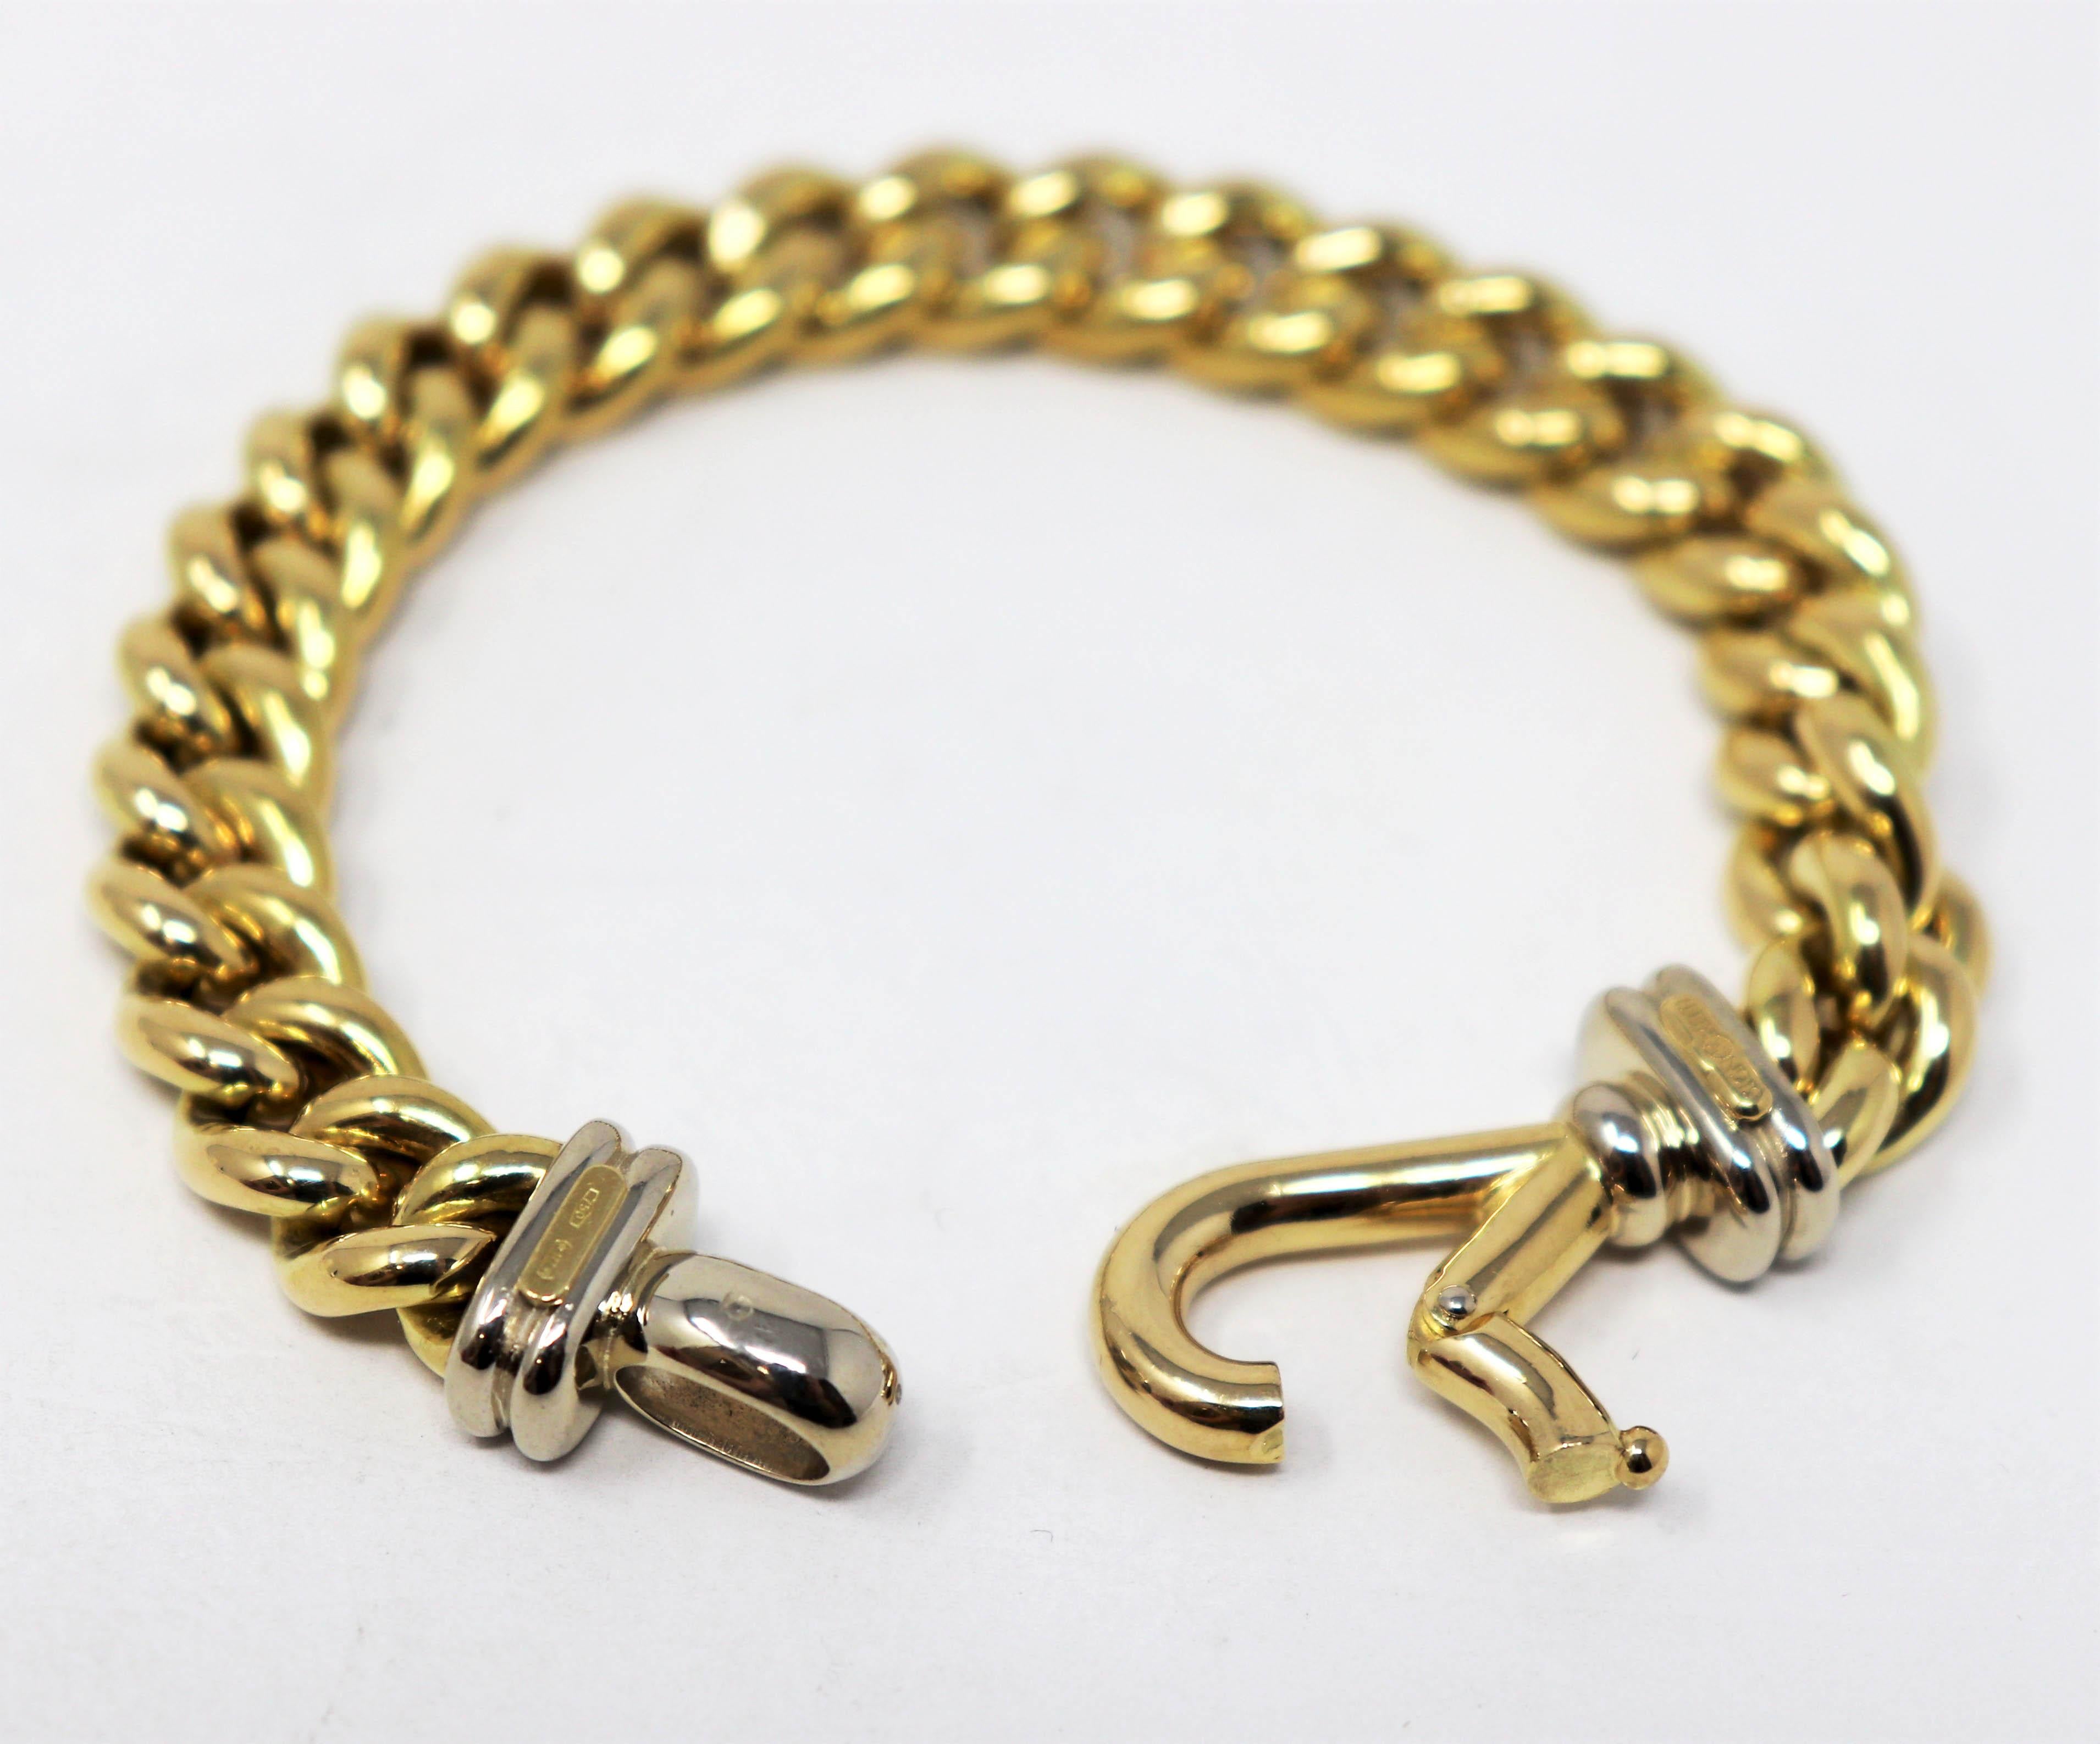 Signoretti Polished 18 Karat Yellow and White Gold Curb Chain Link Bracelet 3